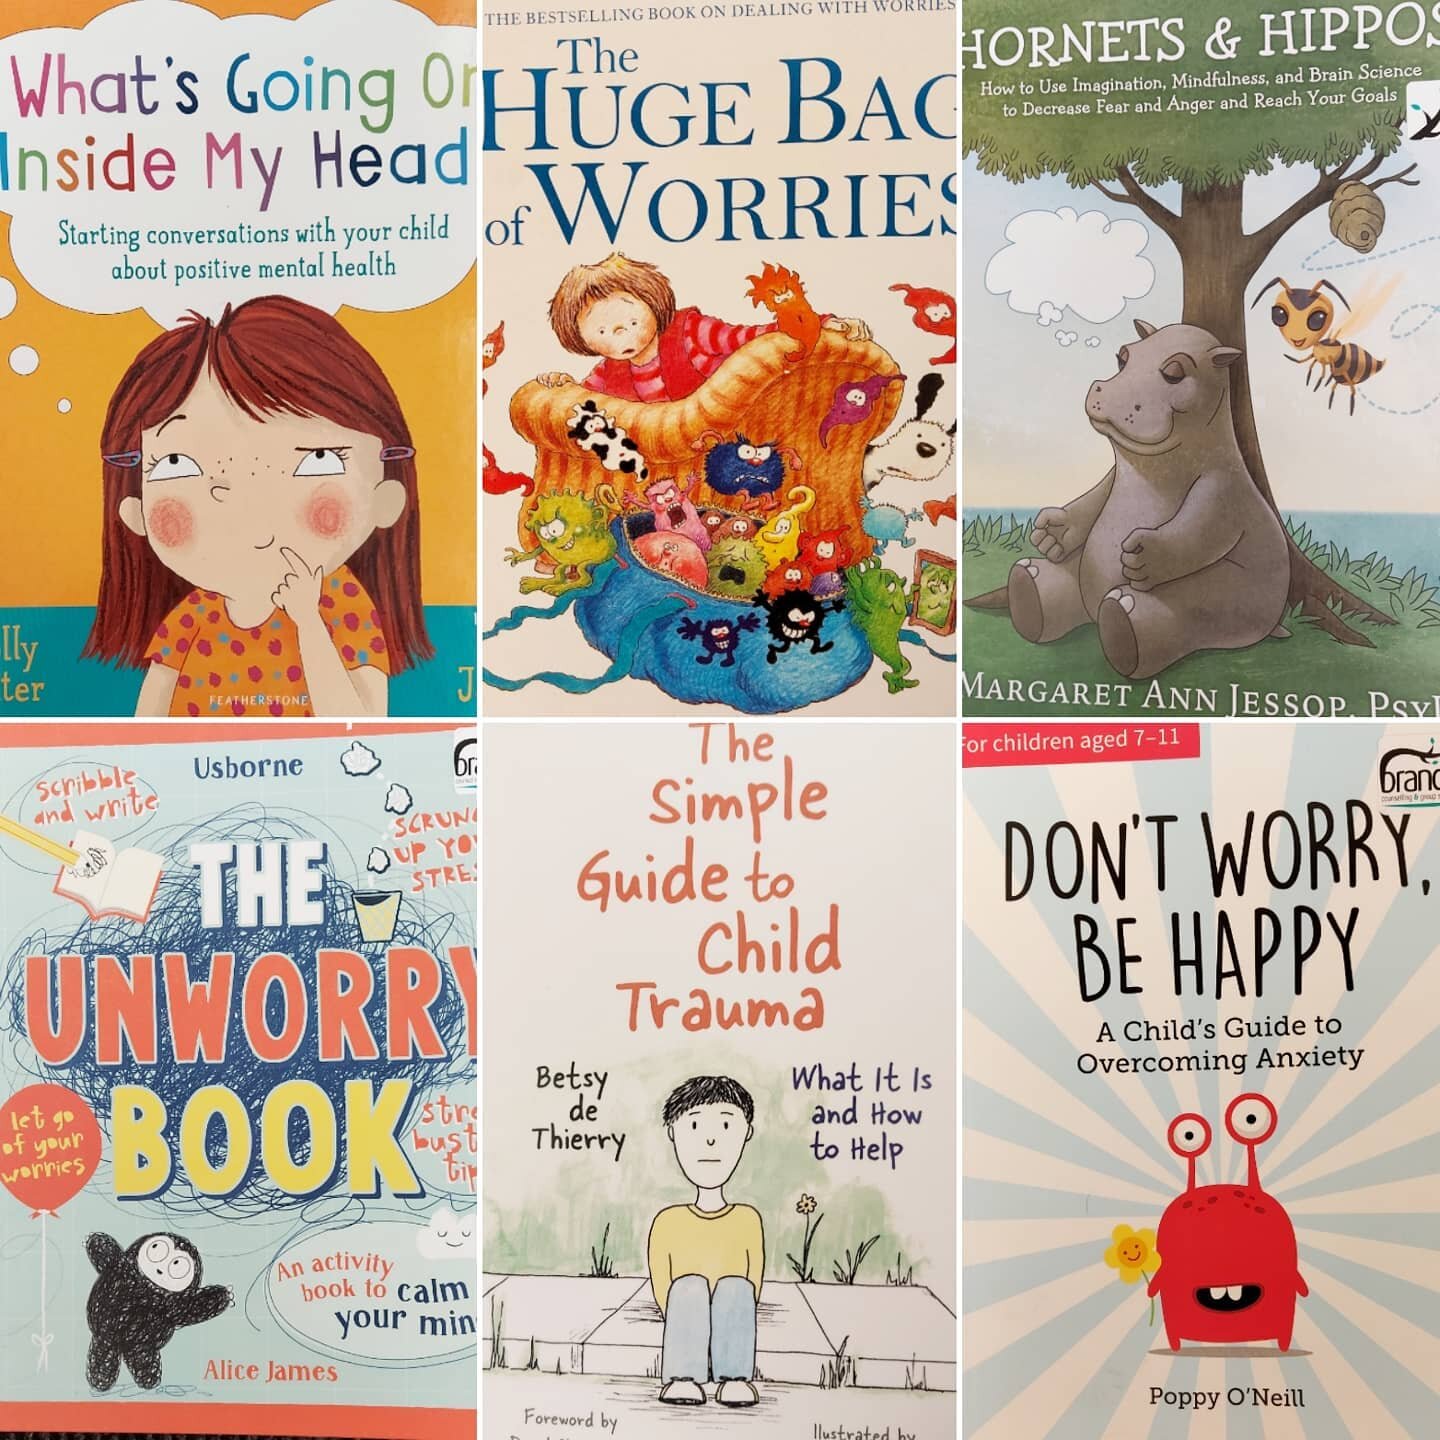 I mostly work with young adults but for those in primary school who might be be struggling with our wierd world, here are some helpful books. Some can be explored alone and some are helpful for parent and child to look at together. If you are looking